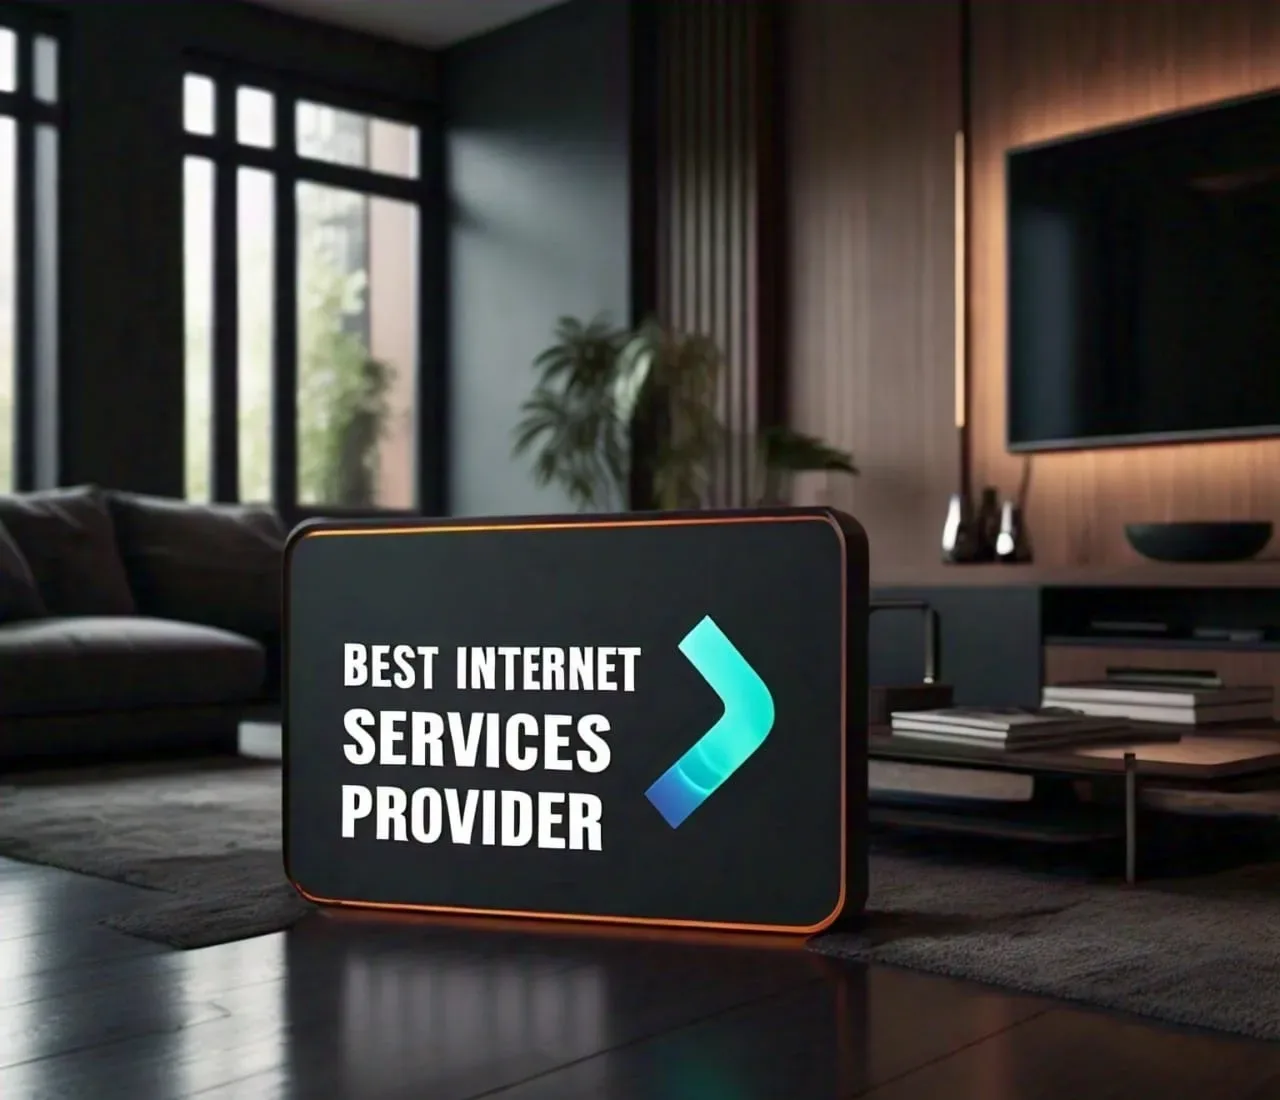 Choose the Best Internet Services Provider to enhance your digital life.